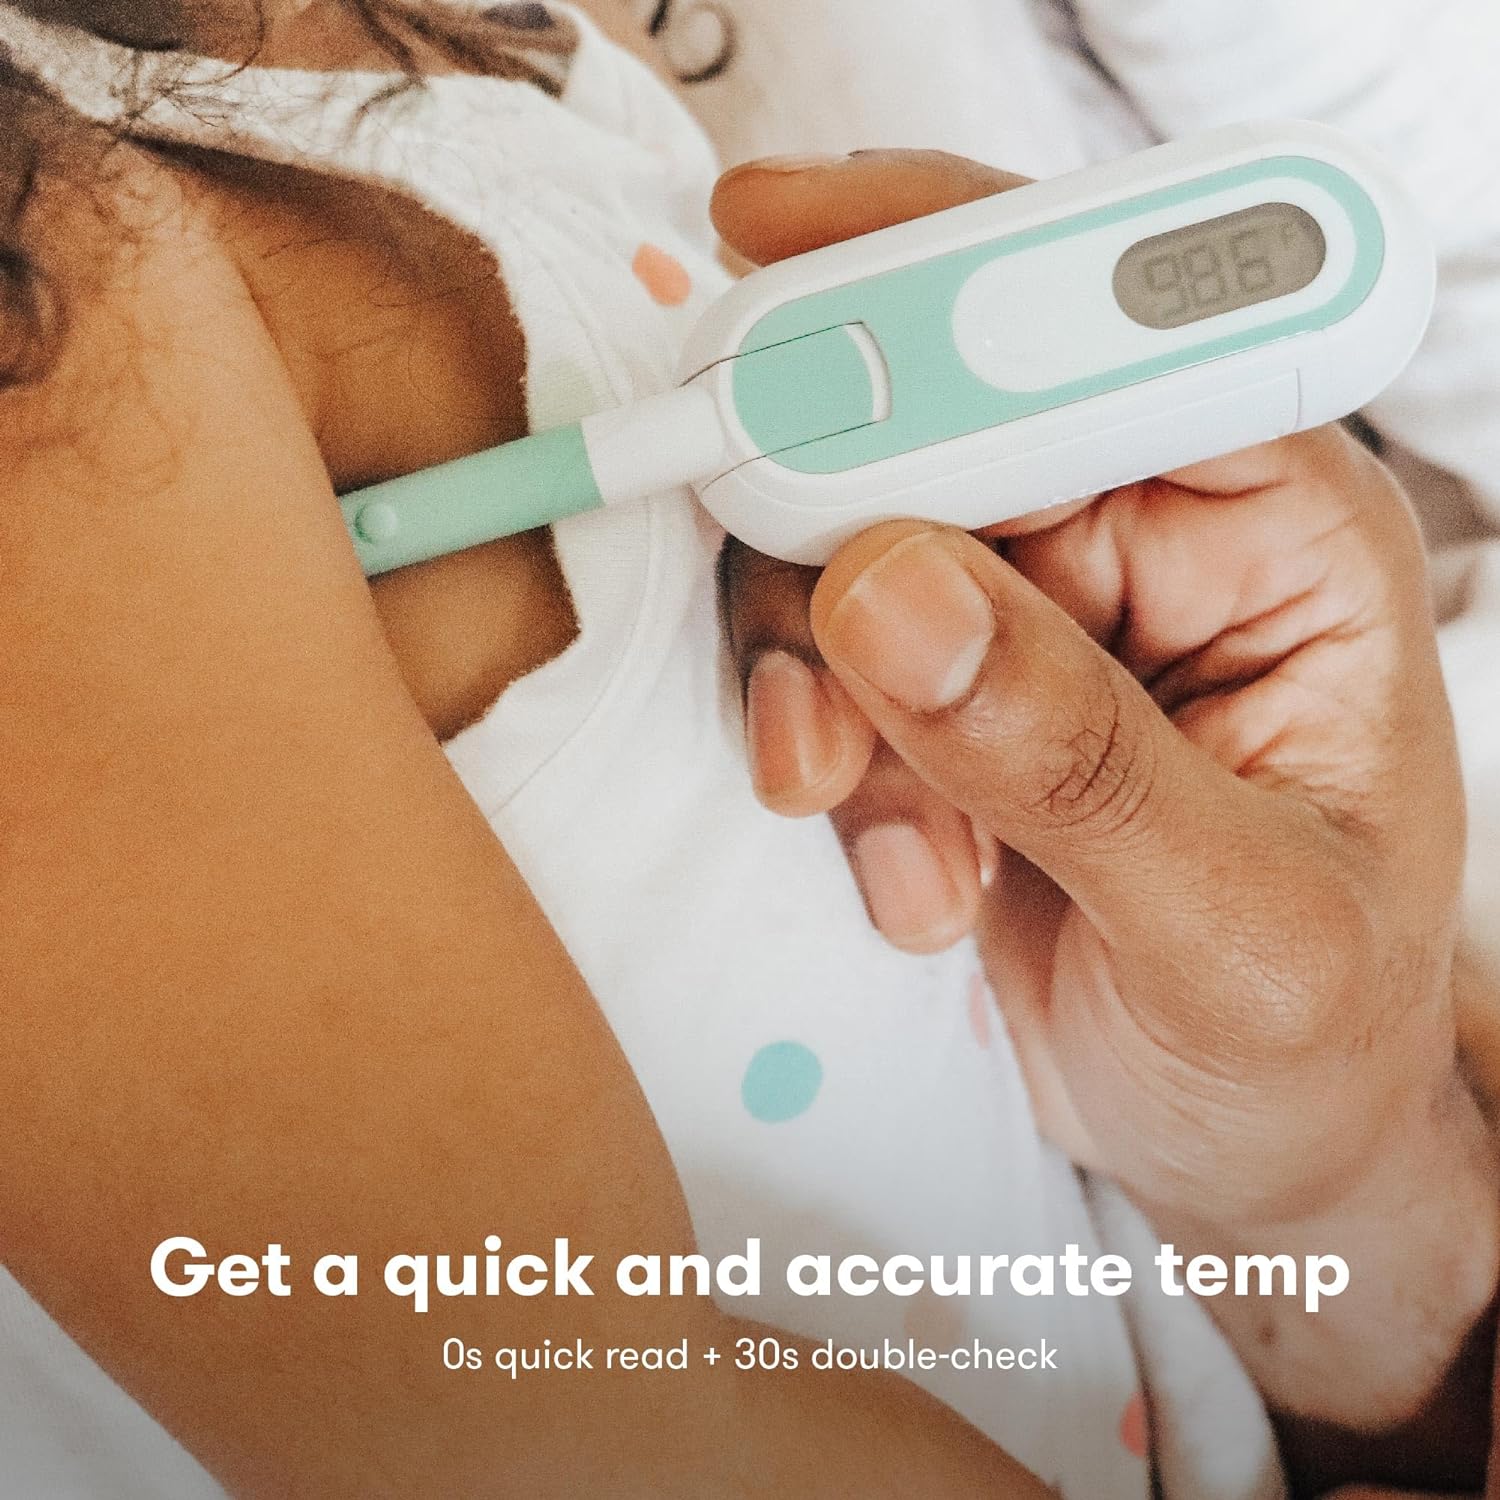 FridaBaby 3-in-1 True Temp Digital Thermometer for Fevers, Babies & Kids (Rectal, Underarm + Oral)